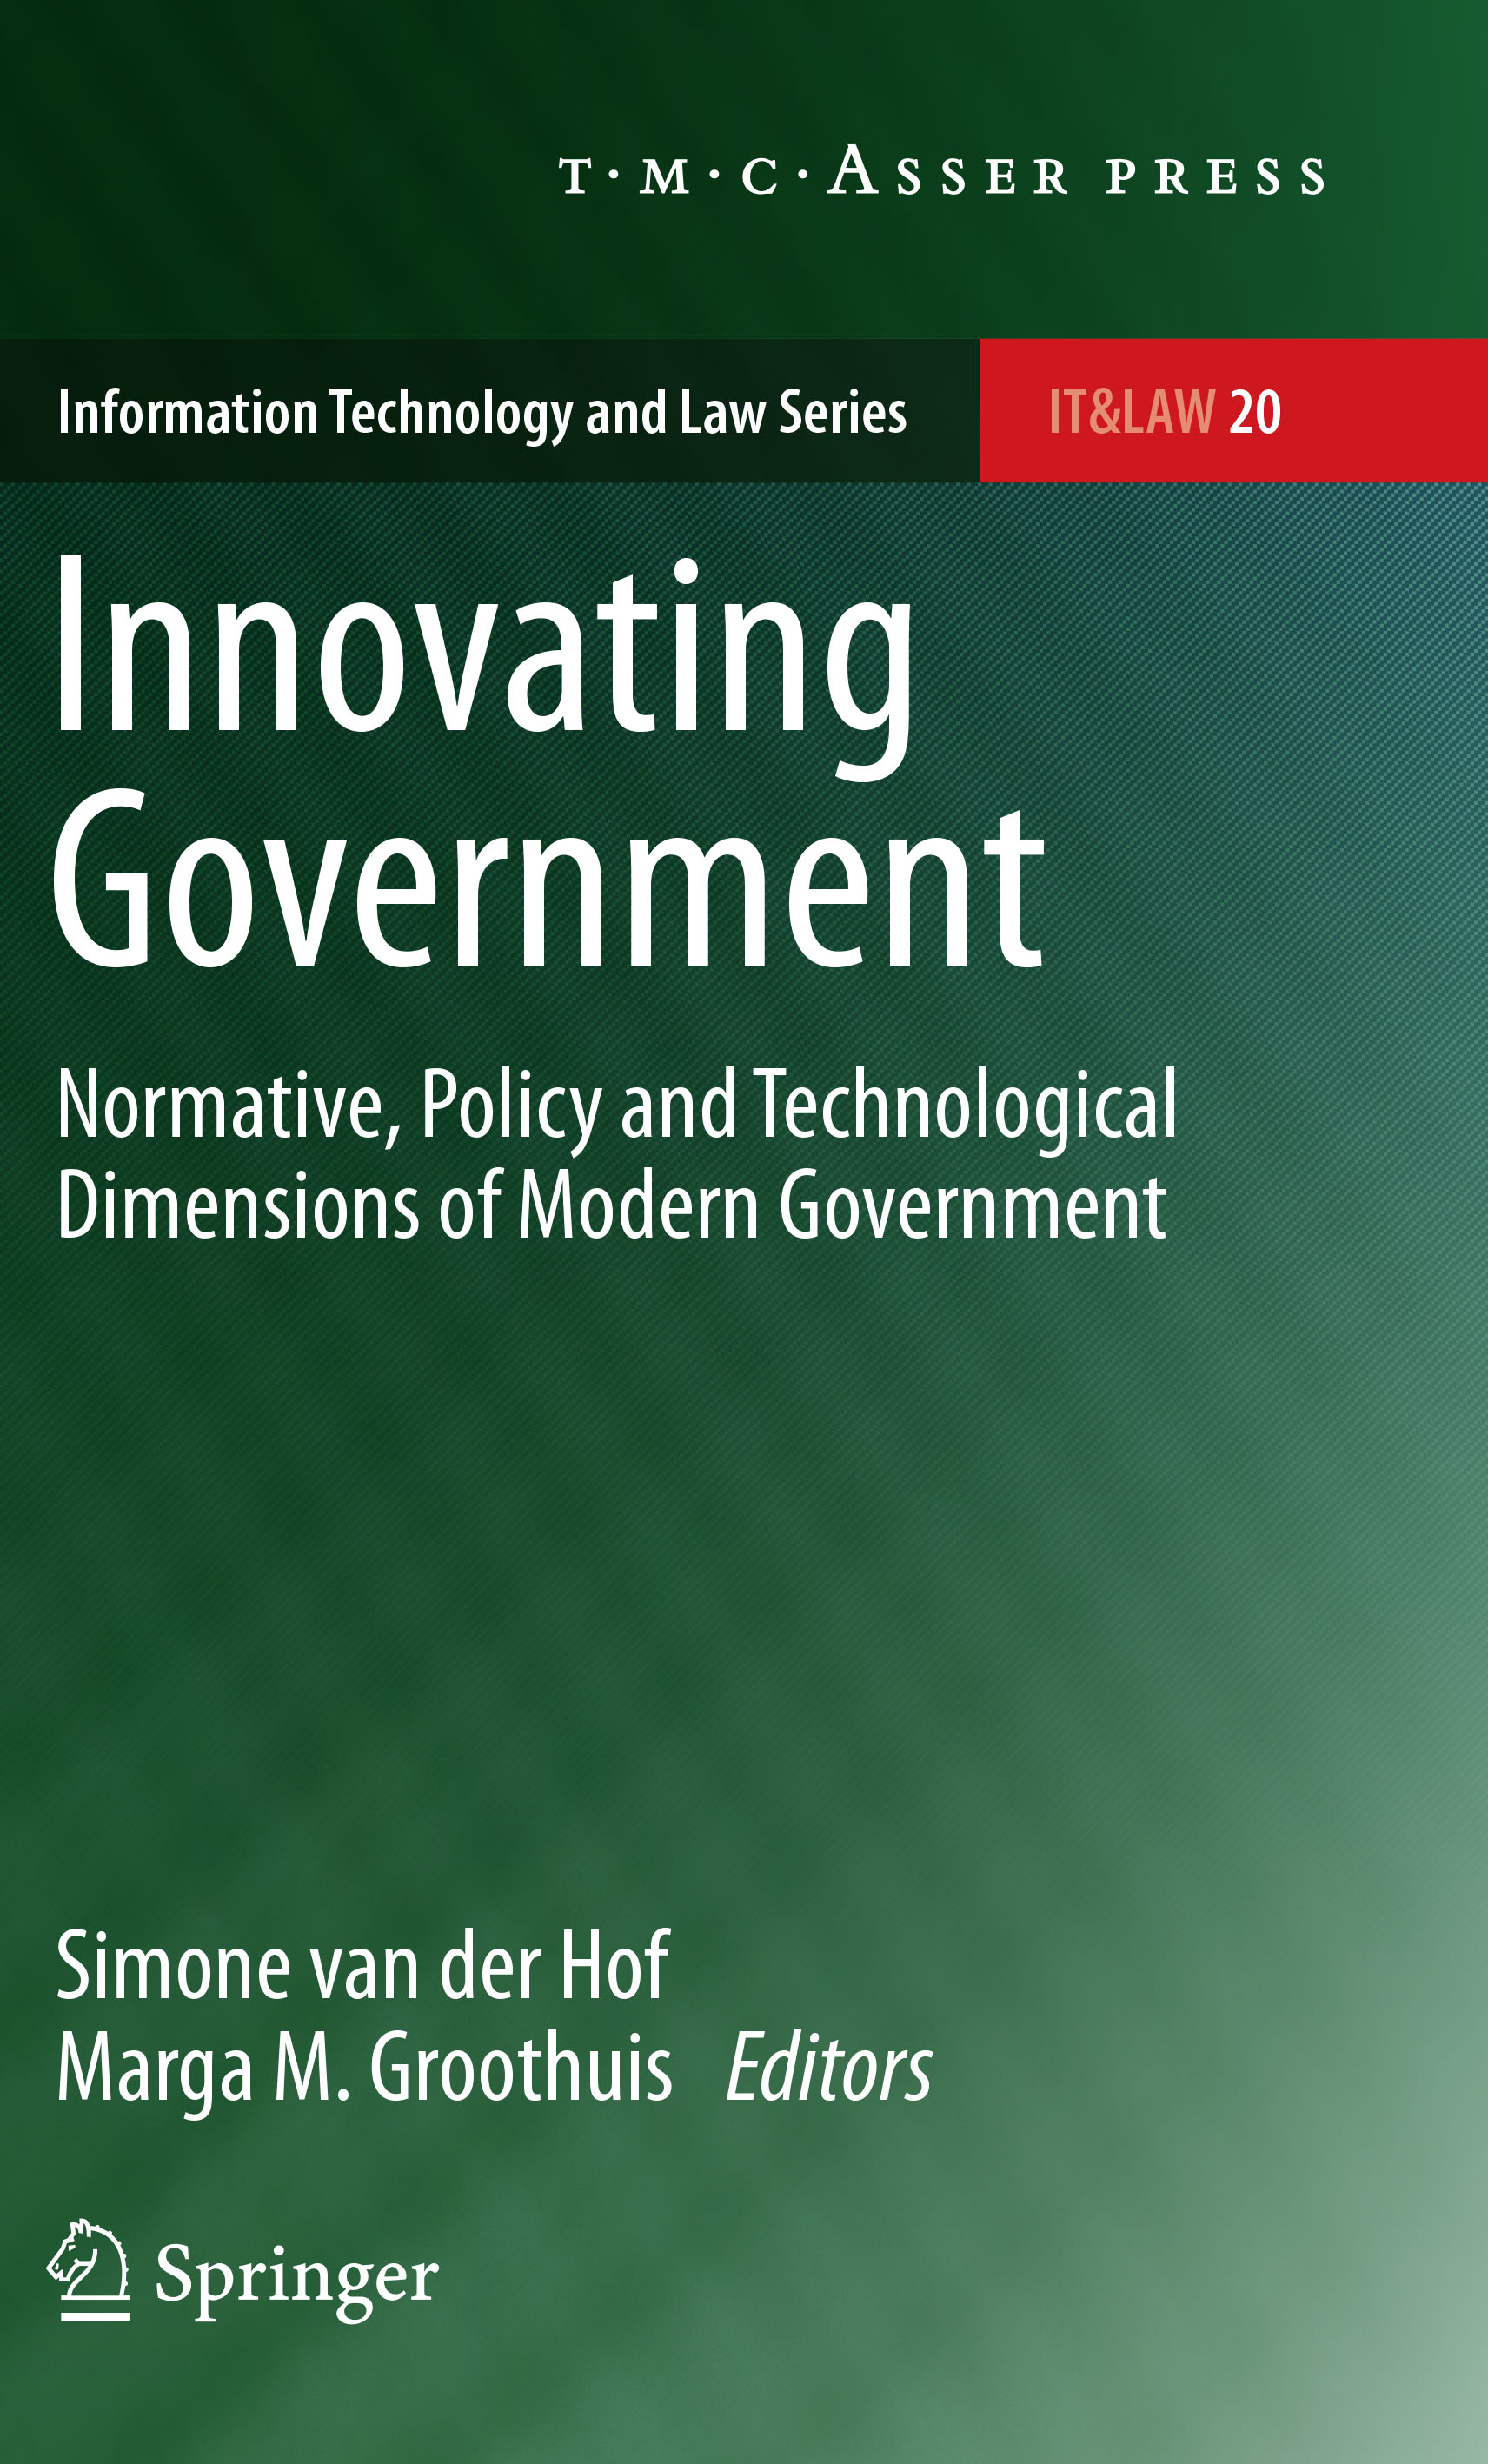 Innovating Government - Normative, Policy and Technological Dimensions of Modern Government